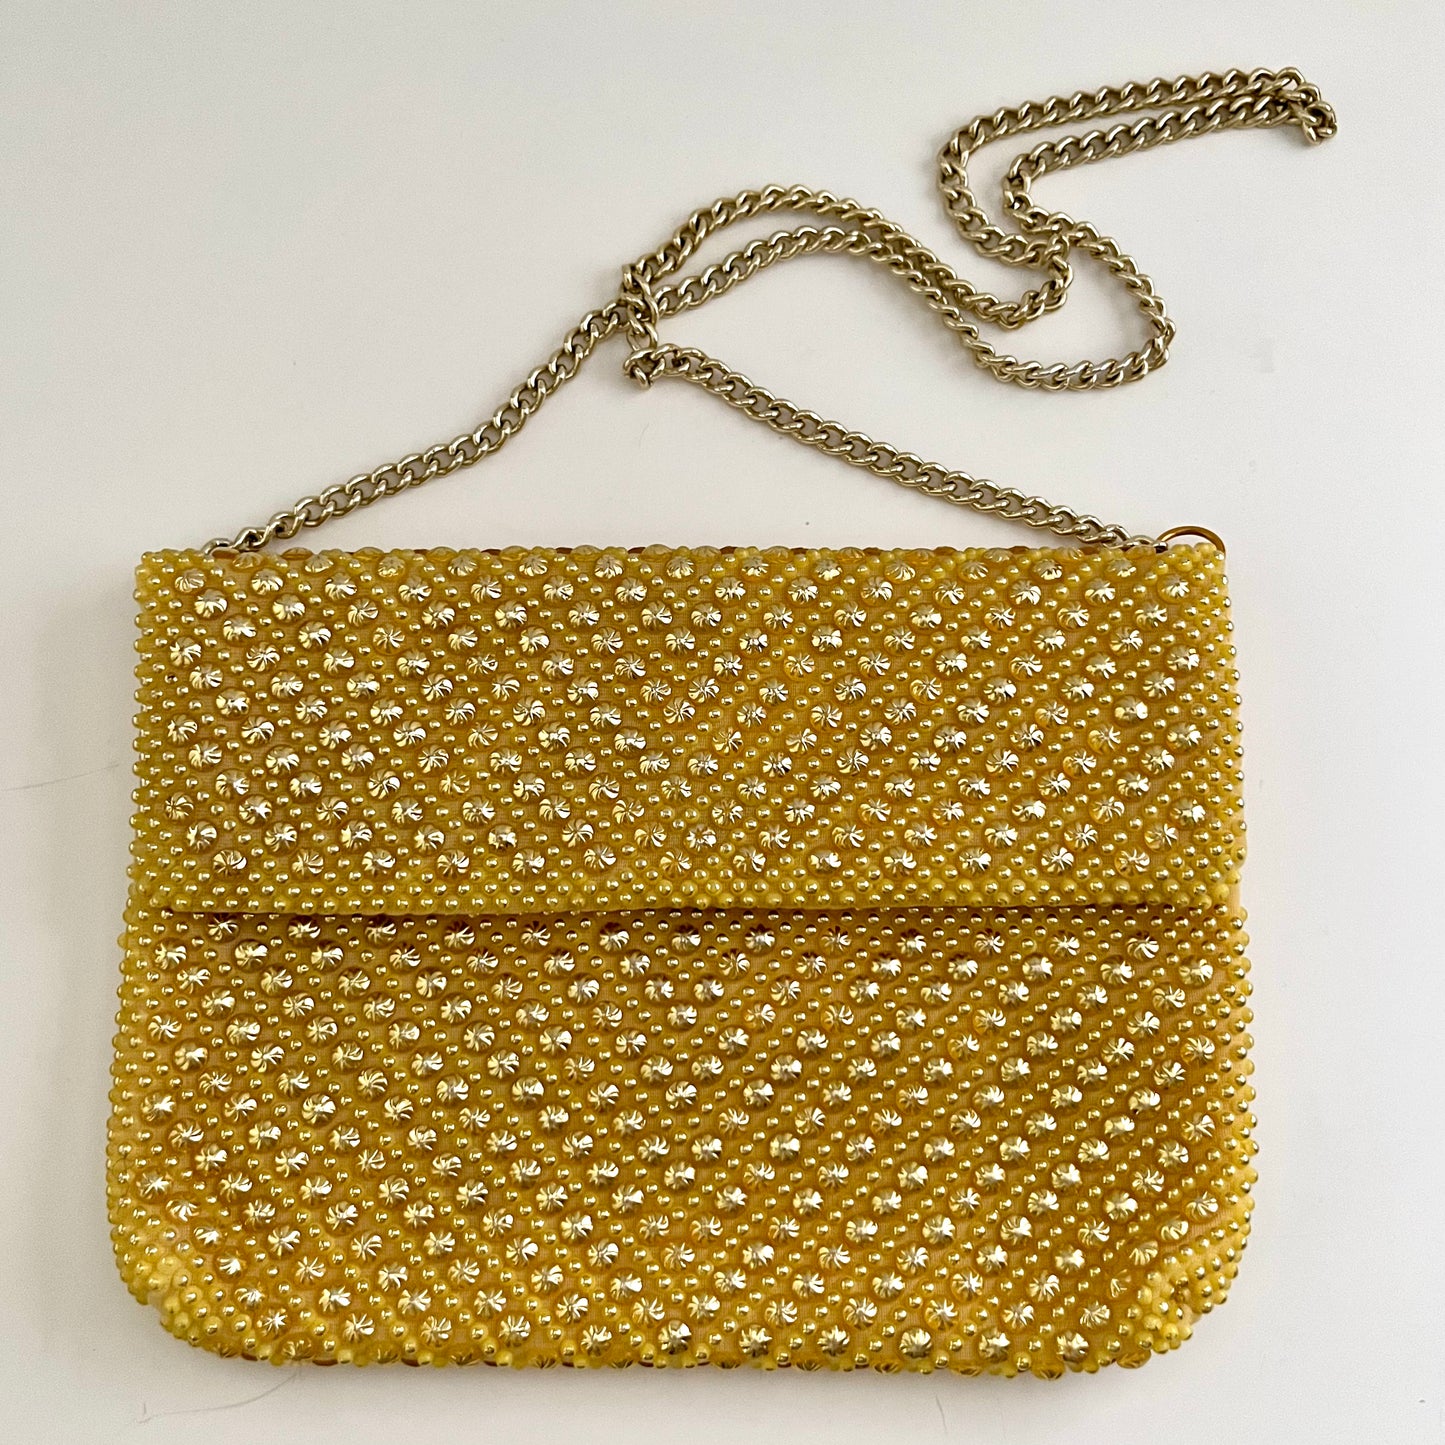 Late 70s/ Early 80s Made in Hong Kong Bead Purse